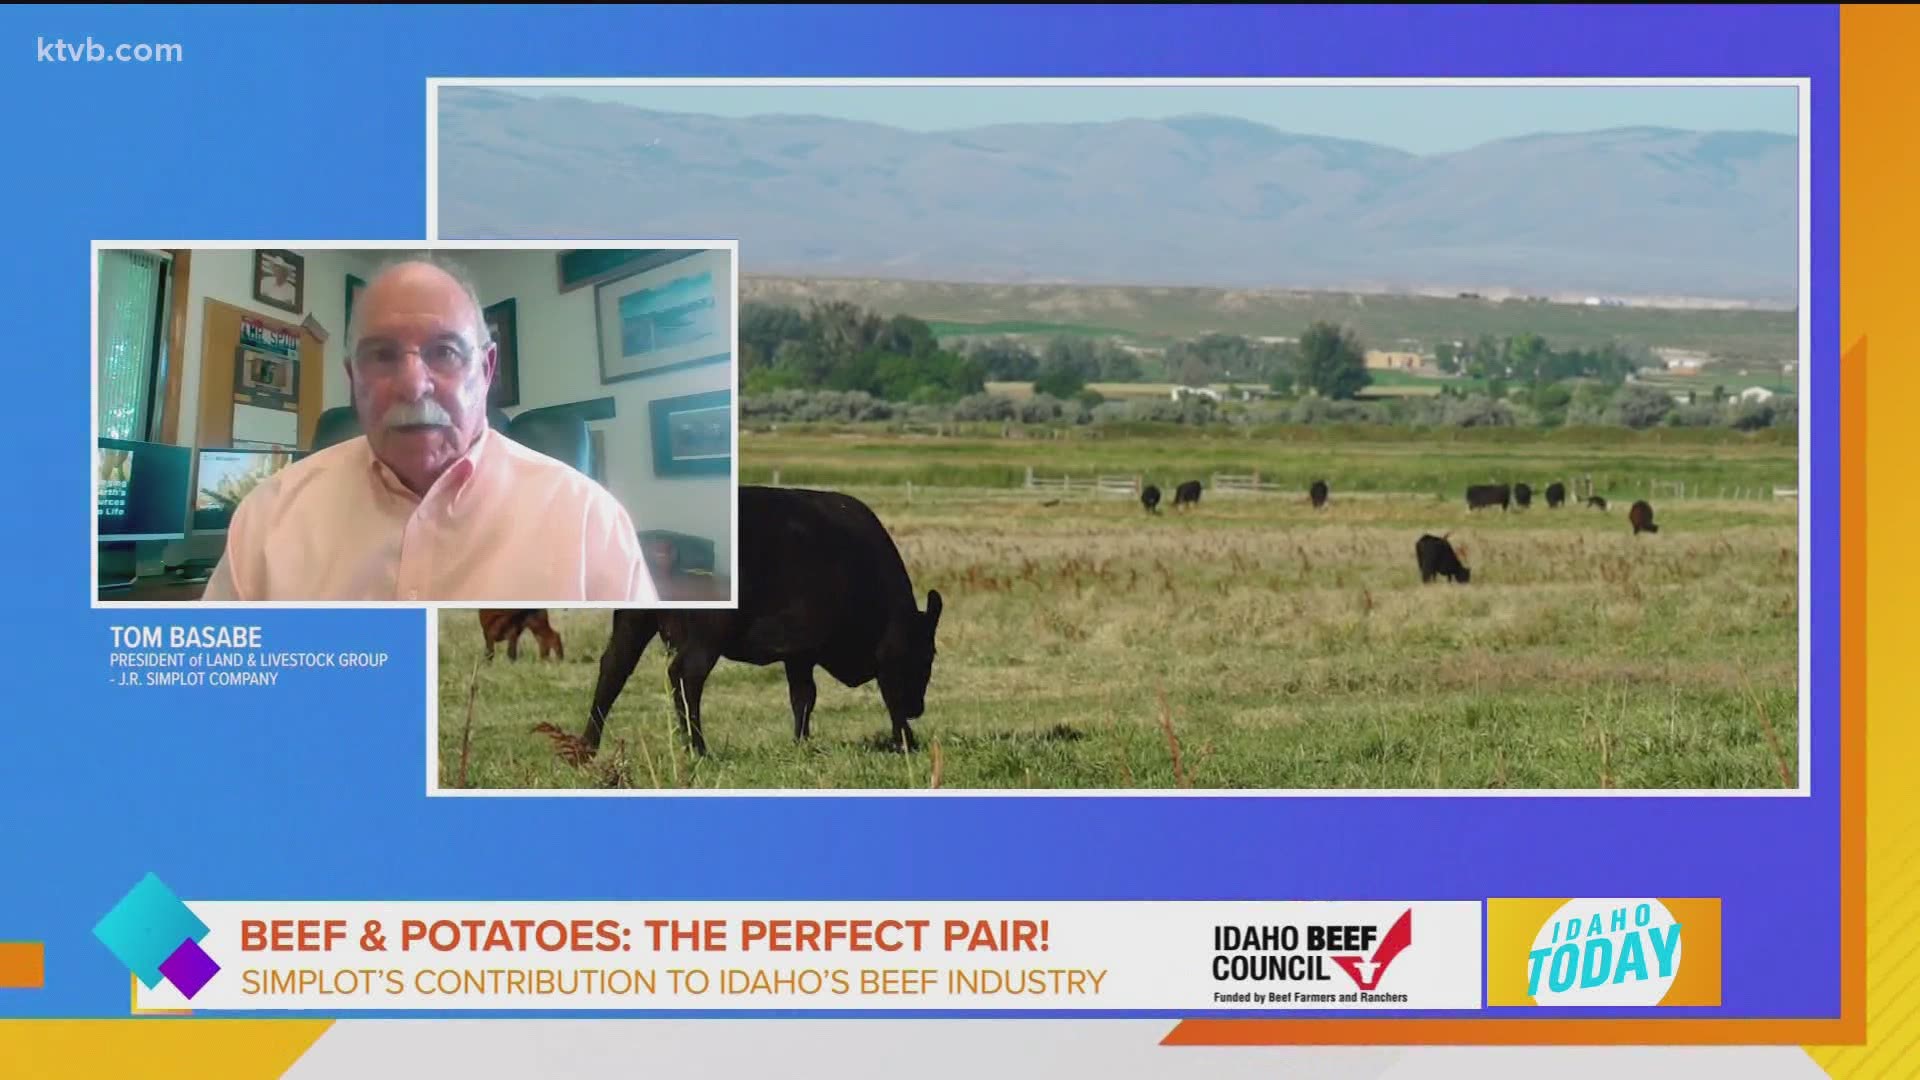 Tom Basabe with Simplot discusses how they contribute to the beef industry in Idaho. Sponsored by Idaho Beef Council.